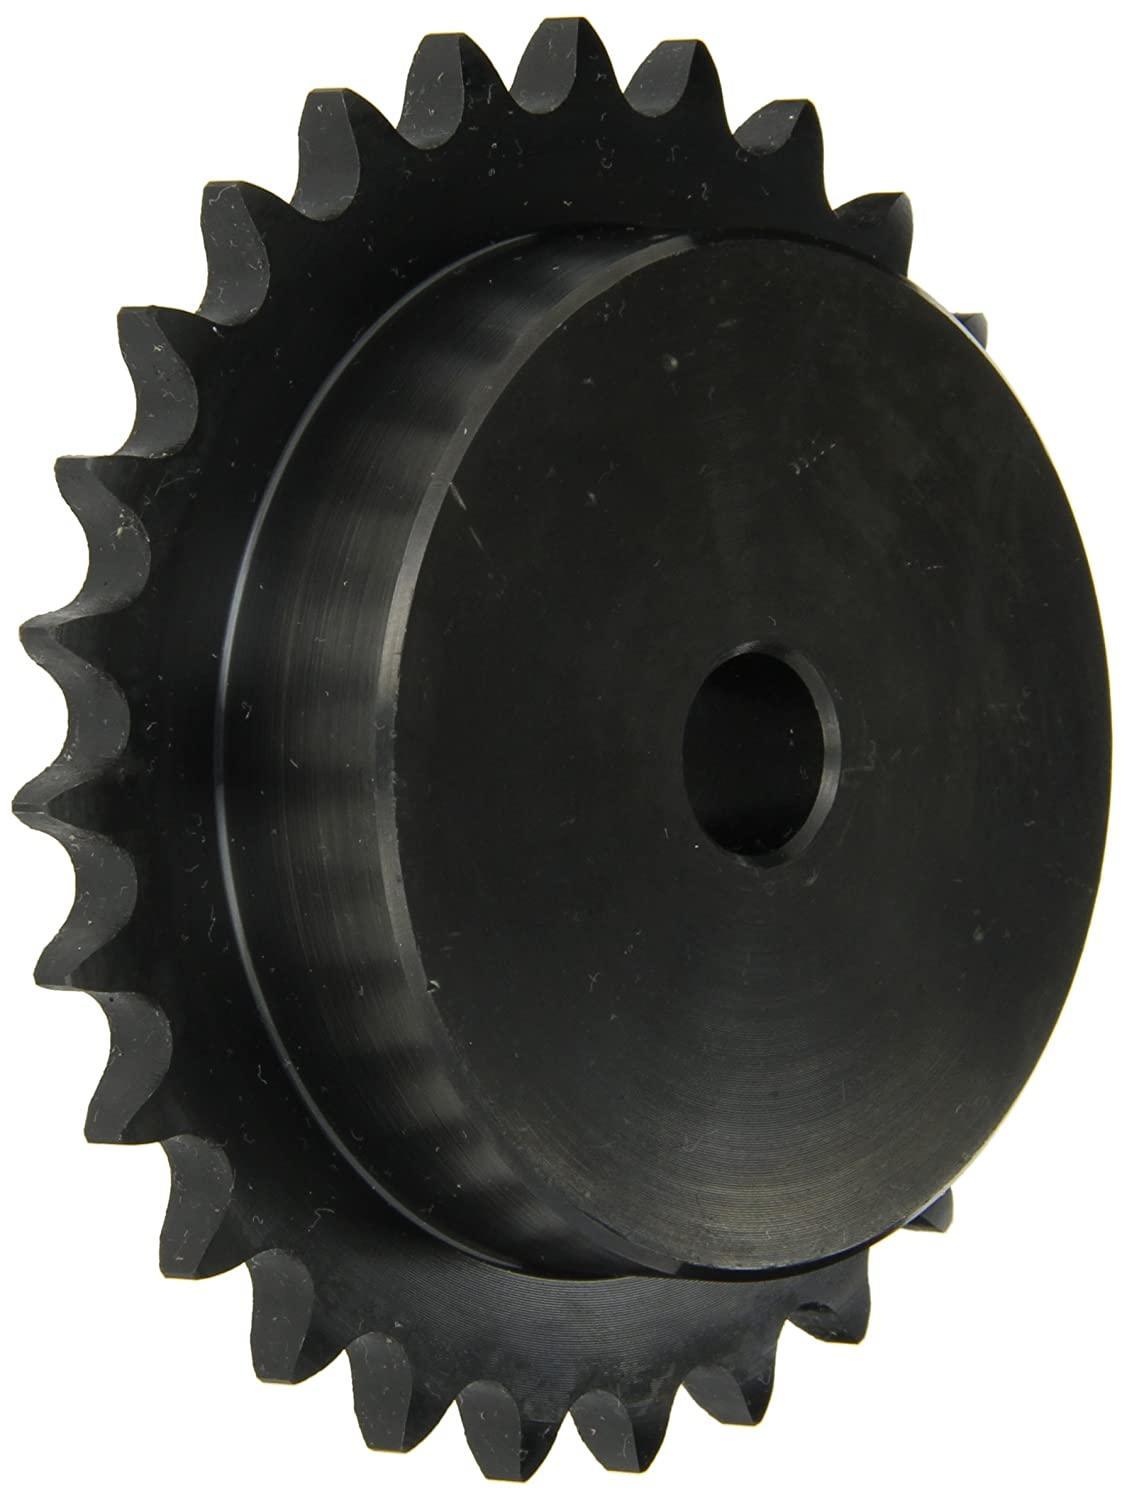 25B36 Roller Chain Sprocket With Stock Bore - Forces Inc